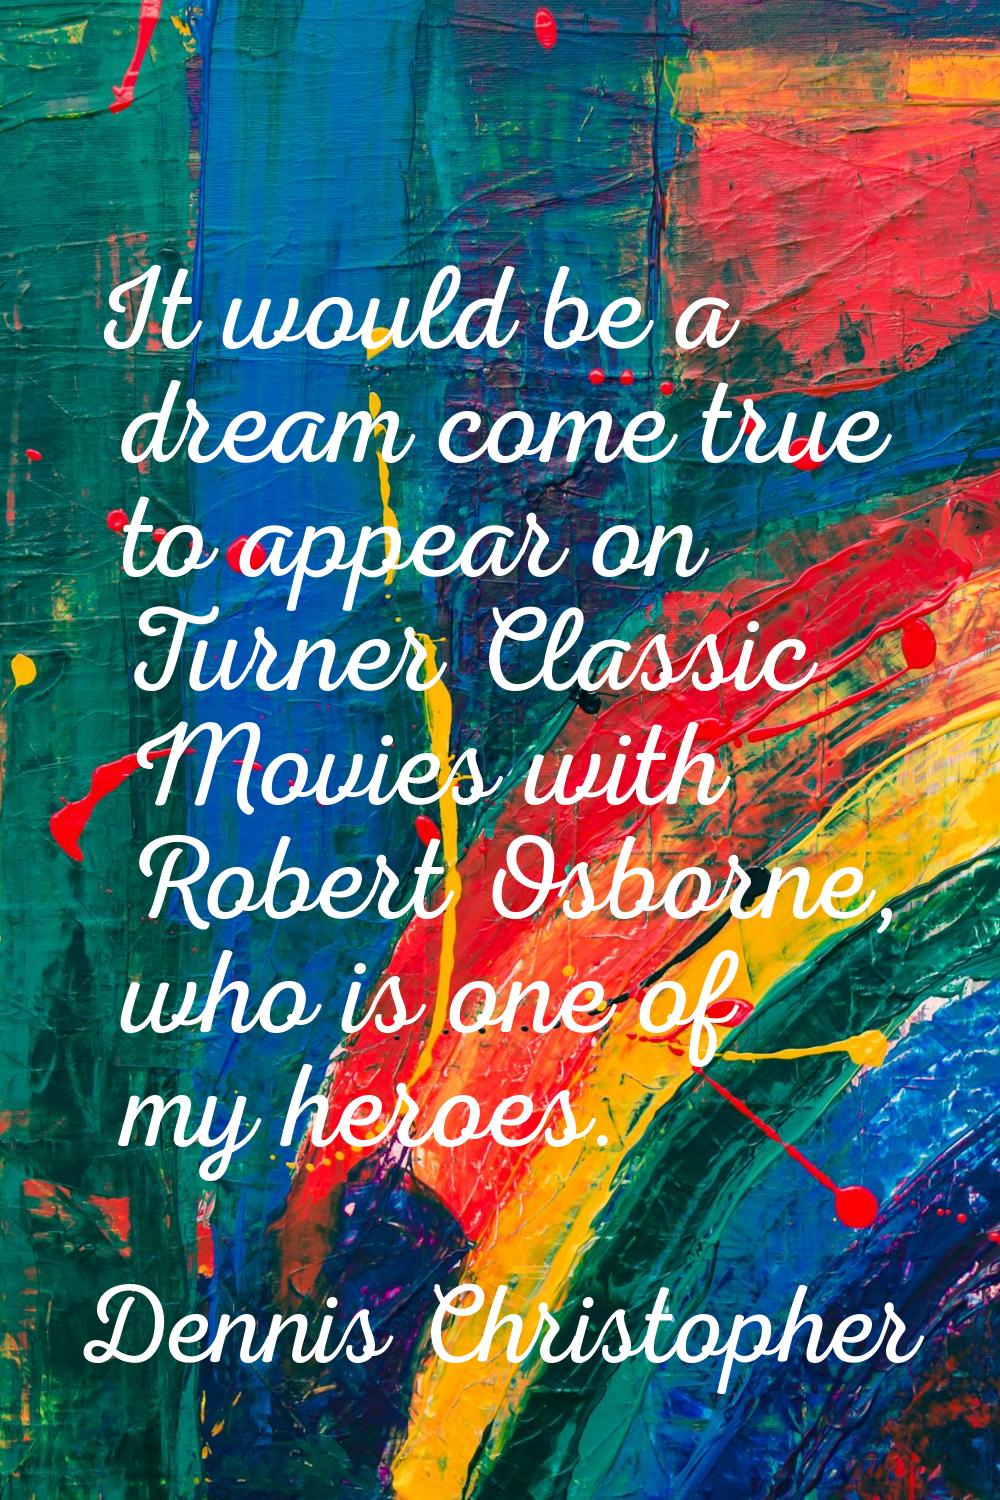 It would be a dream come true to appear on Turner Classic Movies with Robert Osborne, who is one of